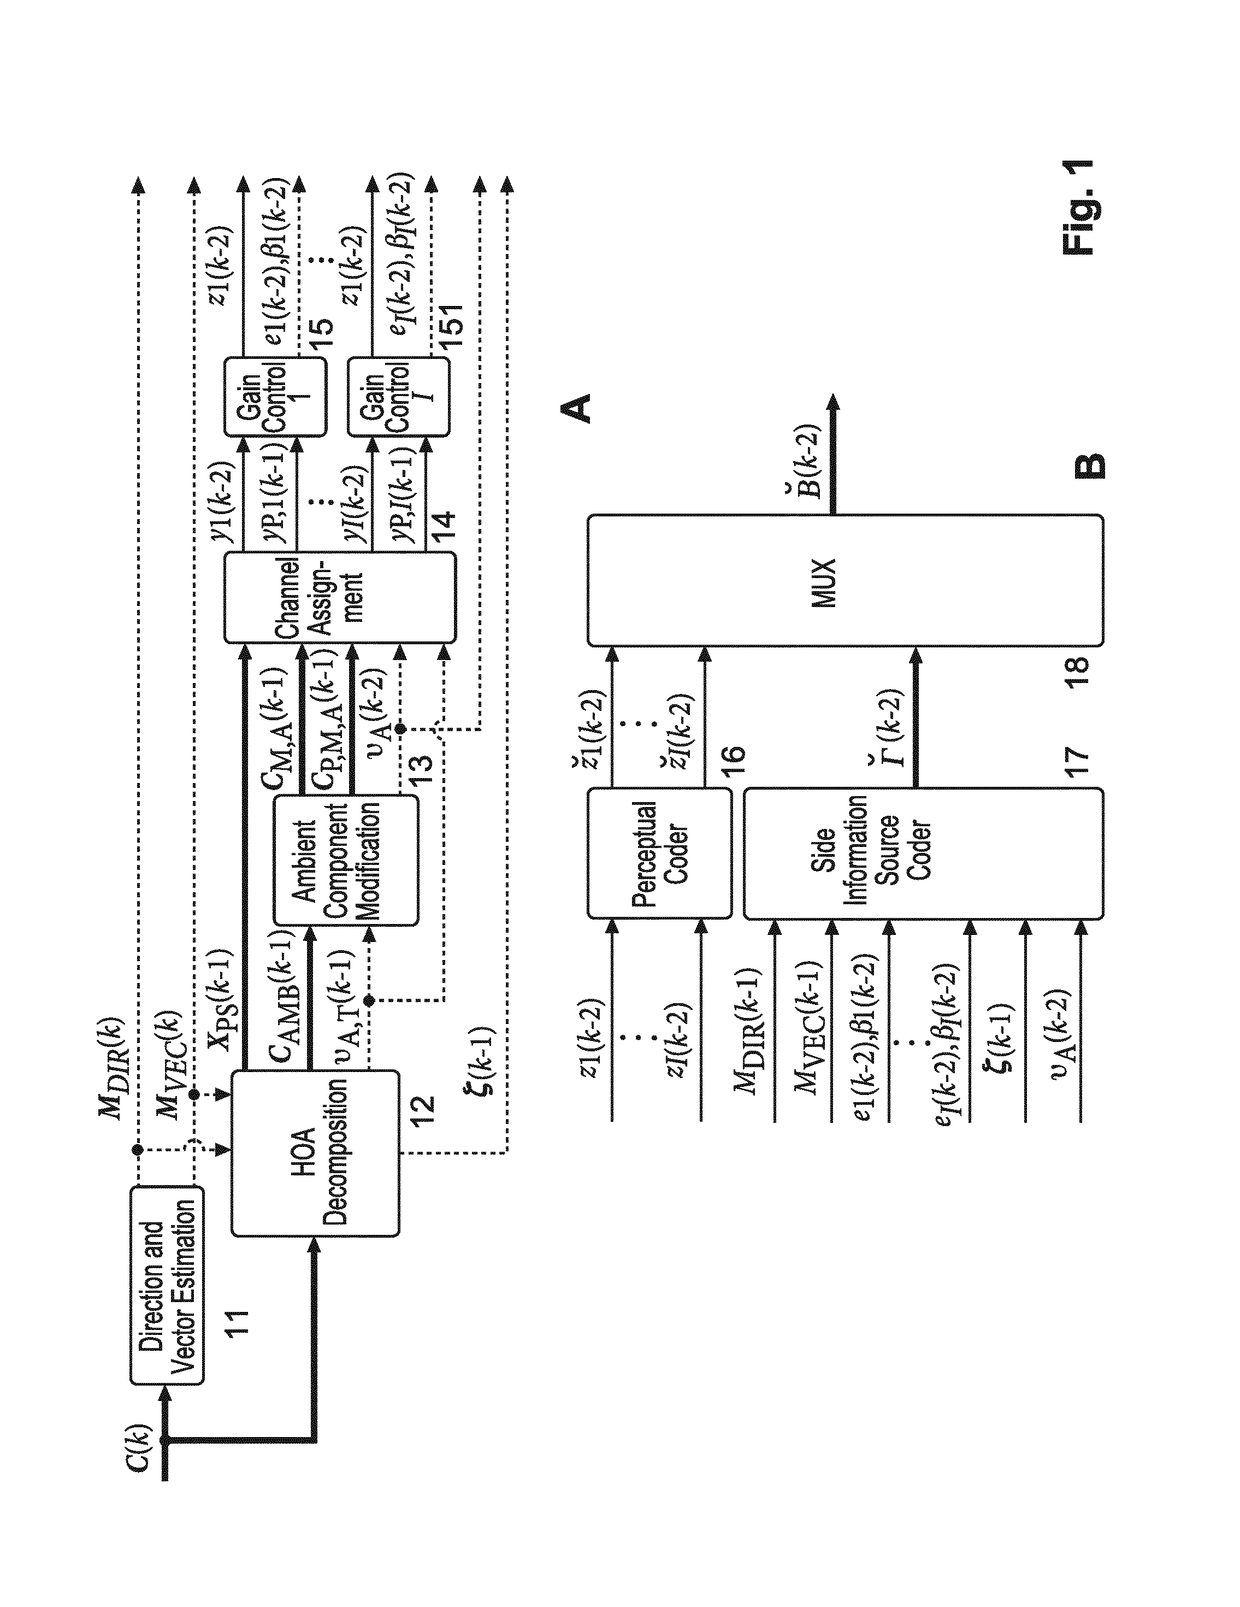 Coded HOA data frame representation that includes non-differential gain values associated with channel signals of specific ones of the dataframes of an HOA data frame representation